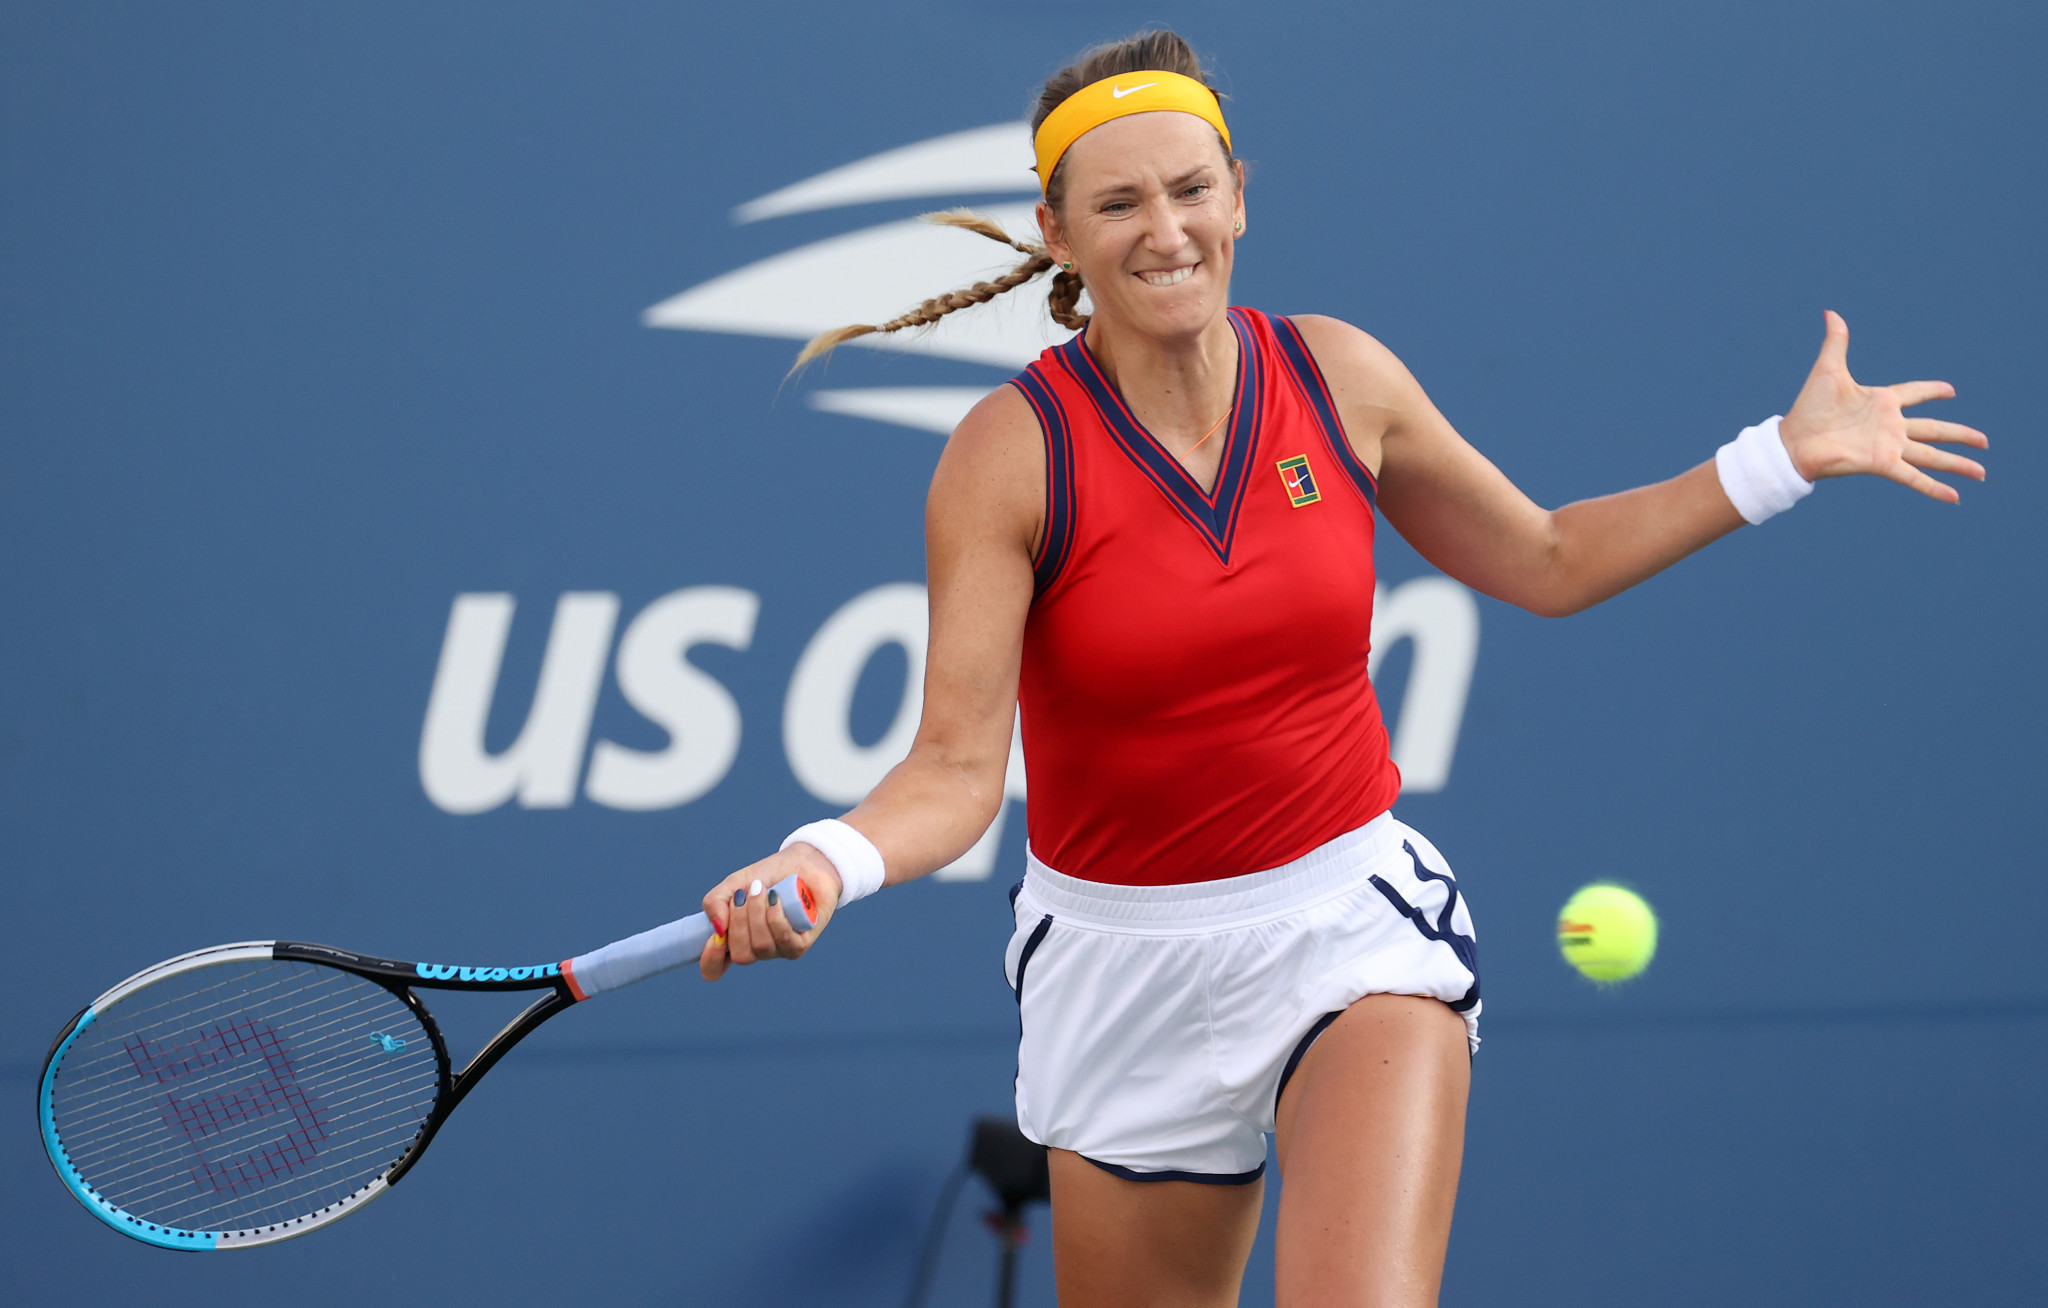 Last year's runner-up Victoria Azarenka of Belarus was among the players to reach the women's second round at the US Open ©Getty Images